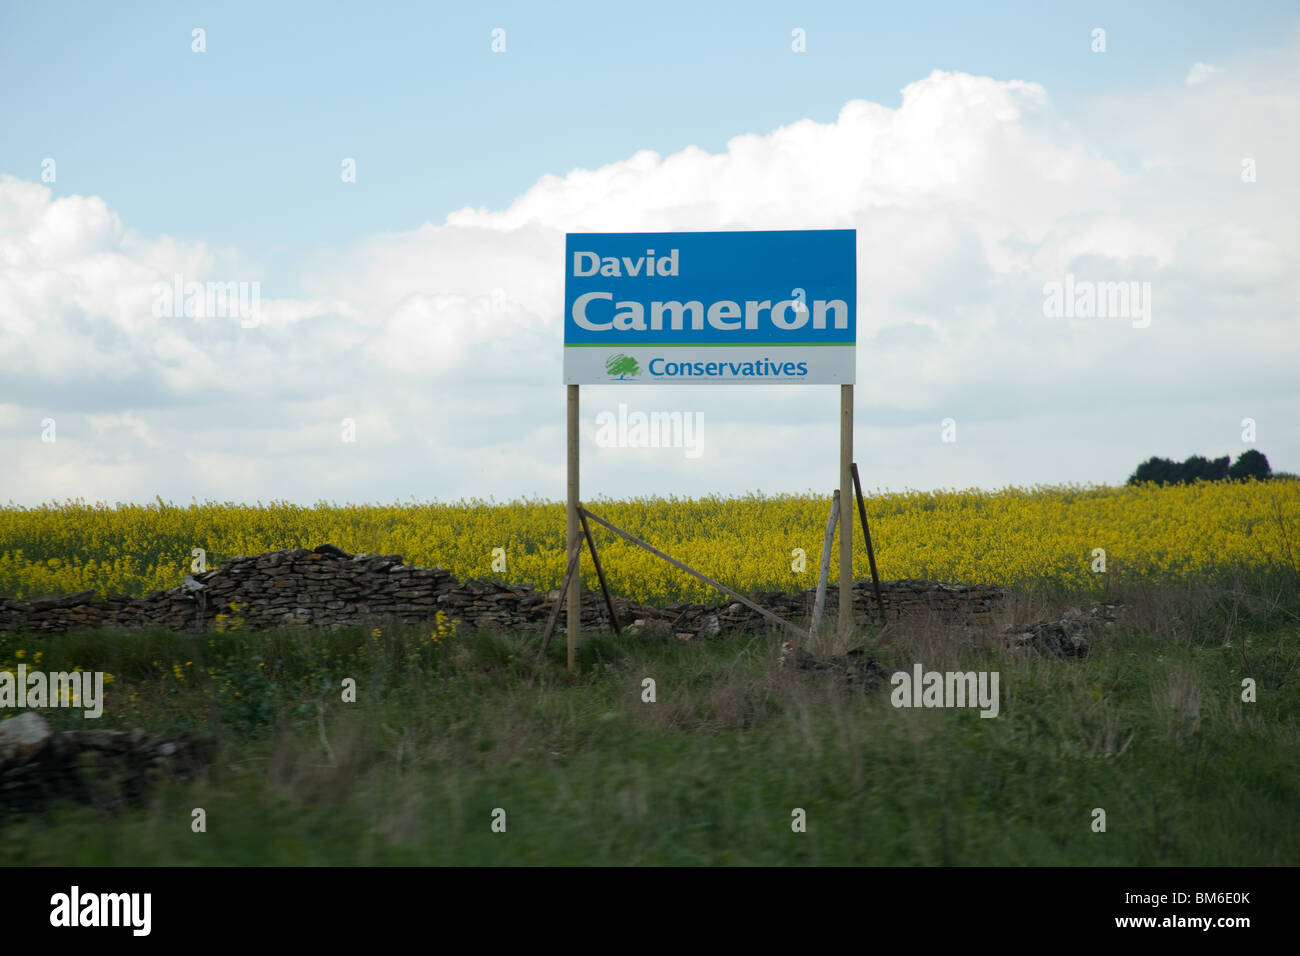 Election sign for David Cameron in the May 2010 elections, Burford Oxfordshire in the Cotswolds, England. Stock Photo